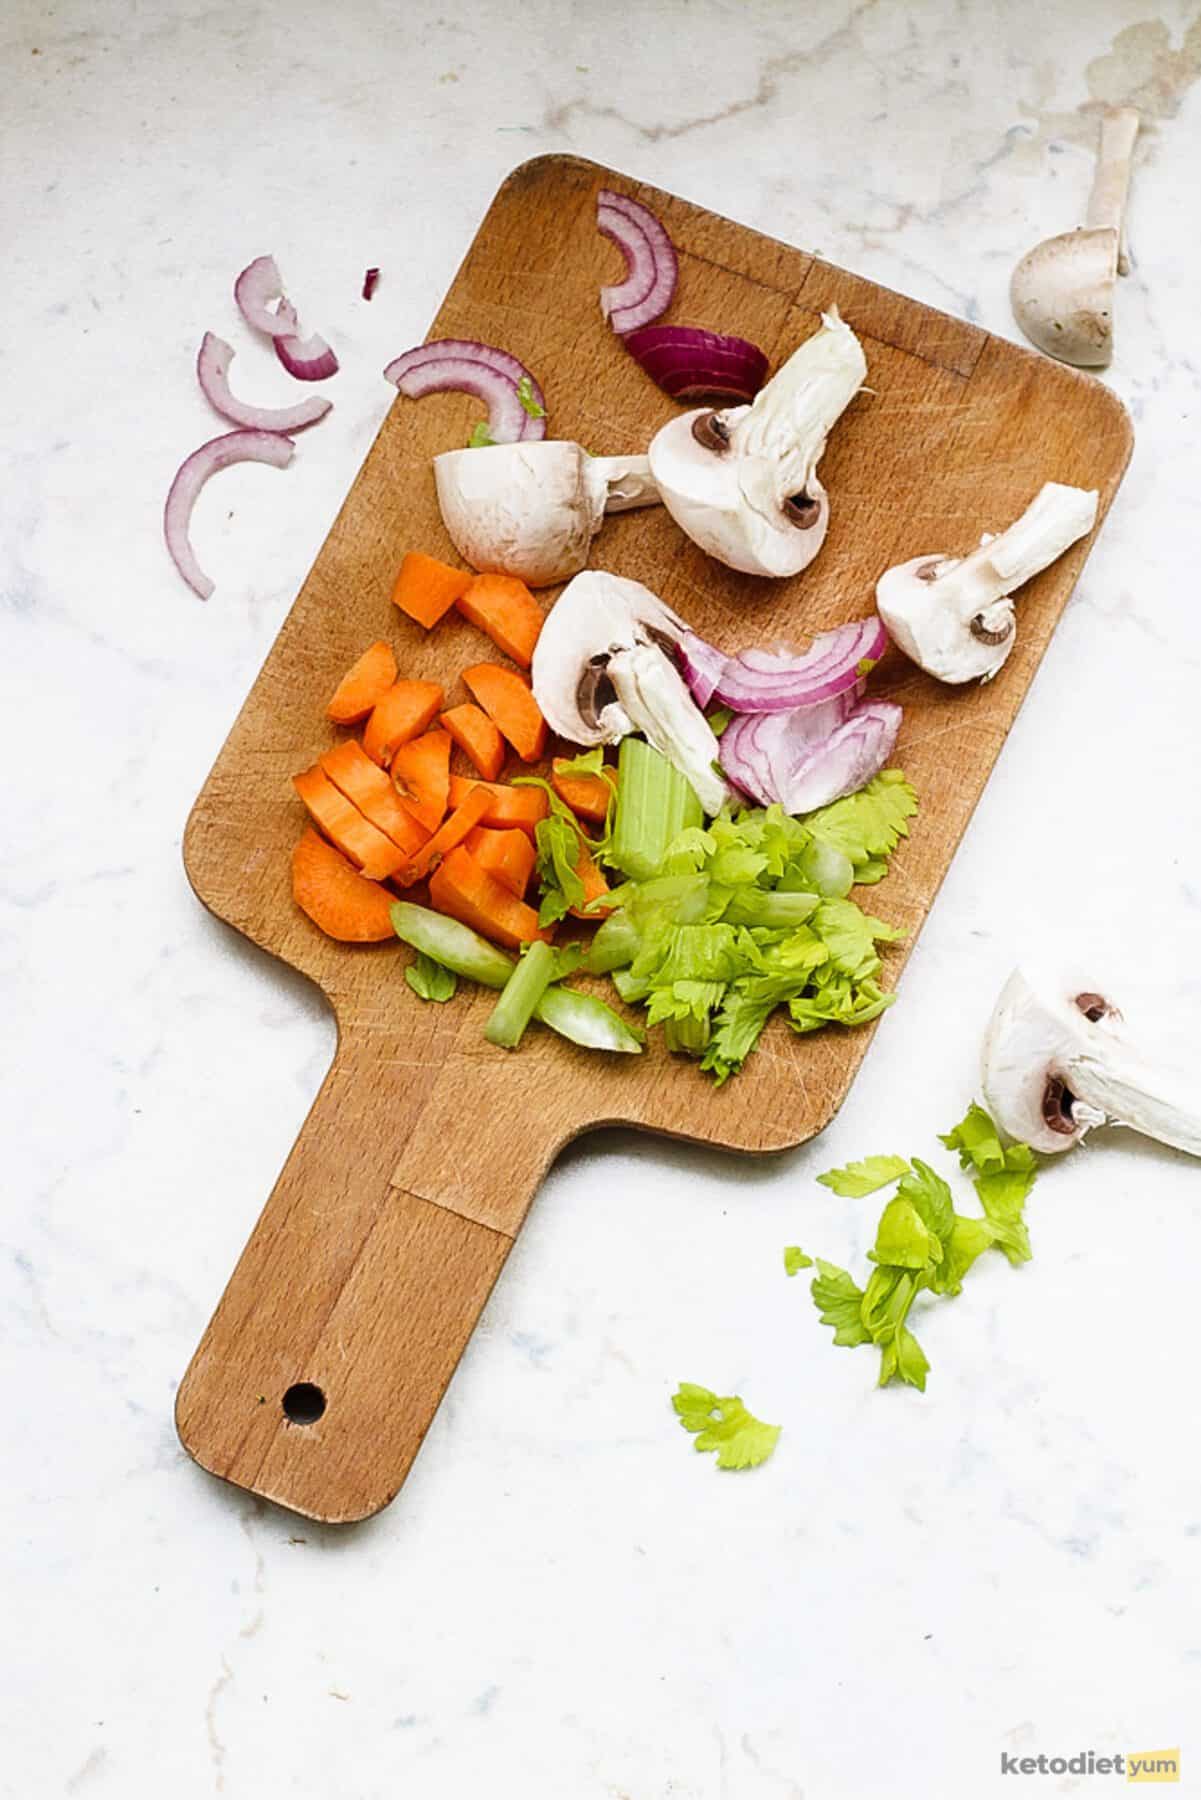 Chopped button mushrooms, red onion, carrot and celery on a chopping board